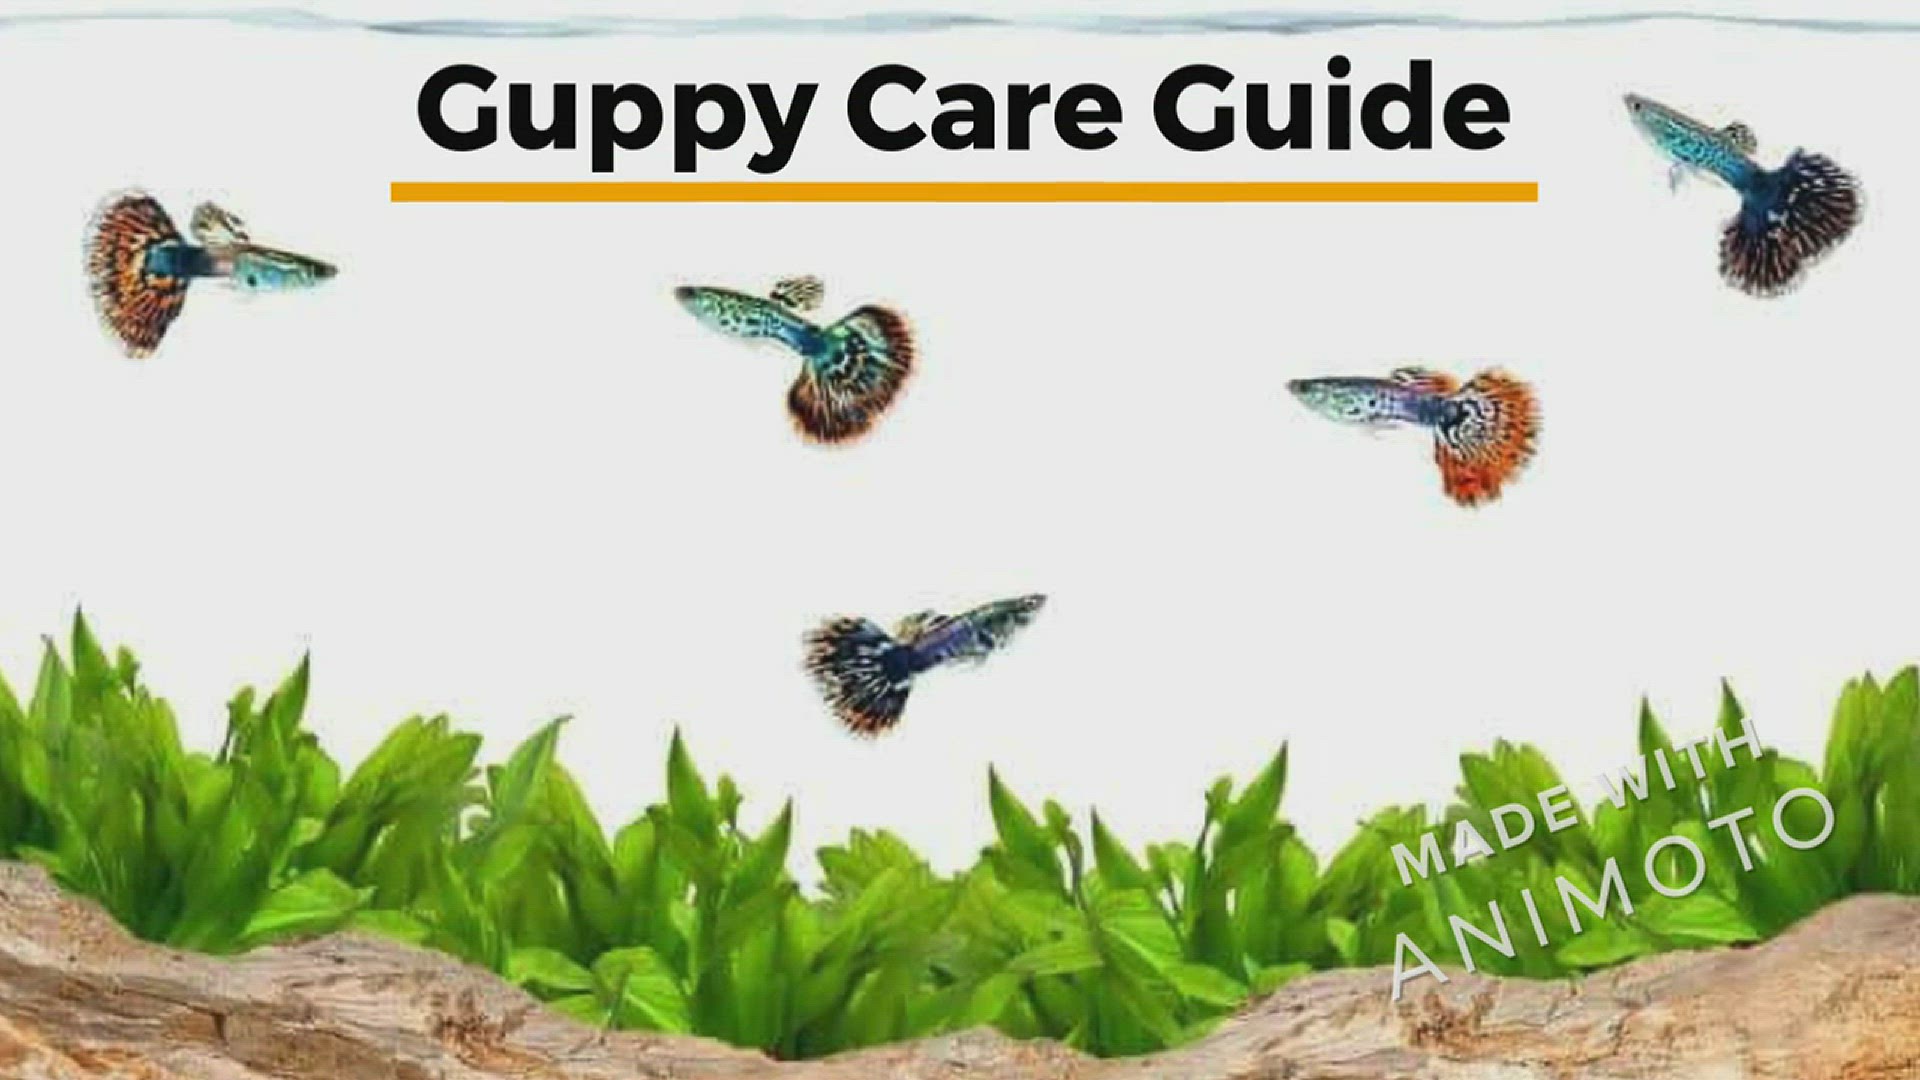 Guppy Care Journal: Guppy Fish Keeper Maintenance Tracker Notebook For All  Your Aquarium Needs. Great For Logging Water Testing, Water Changes, And